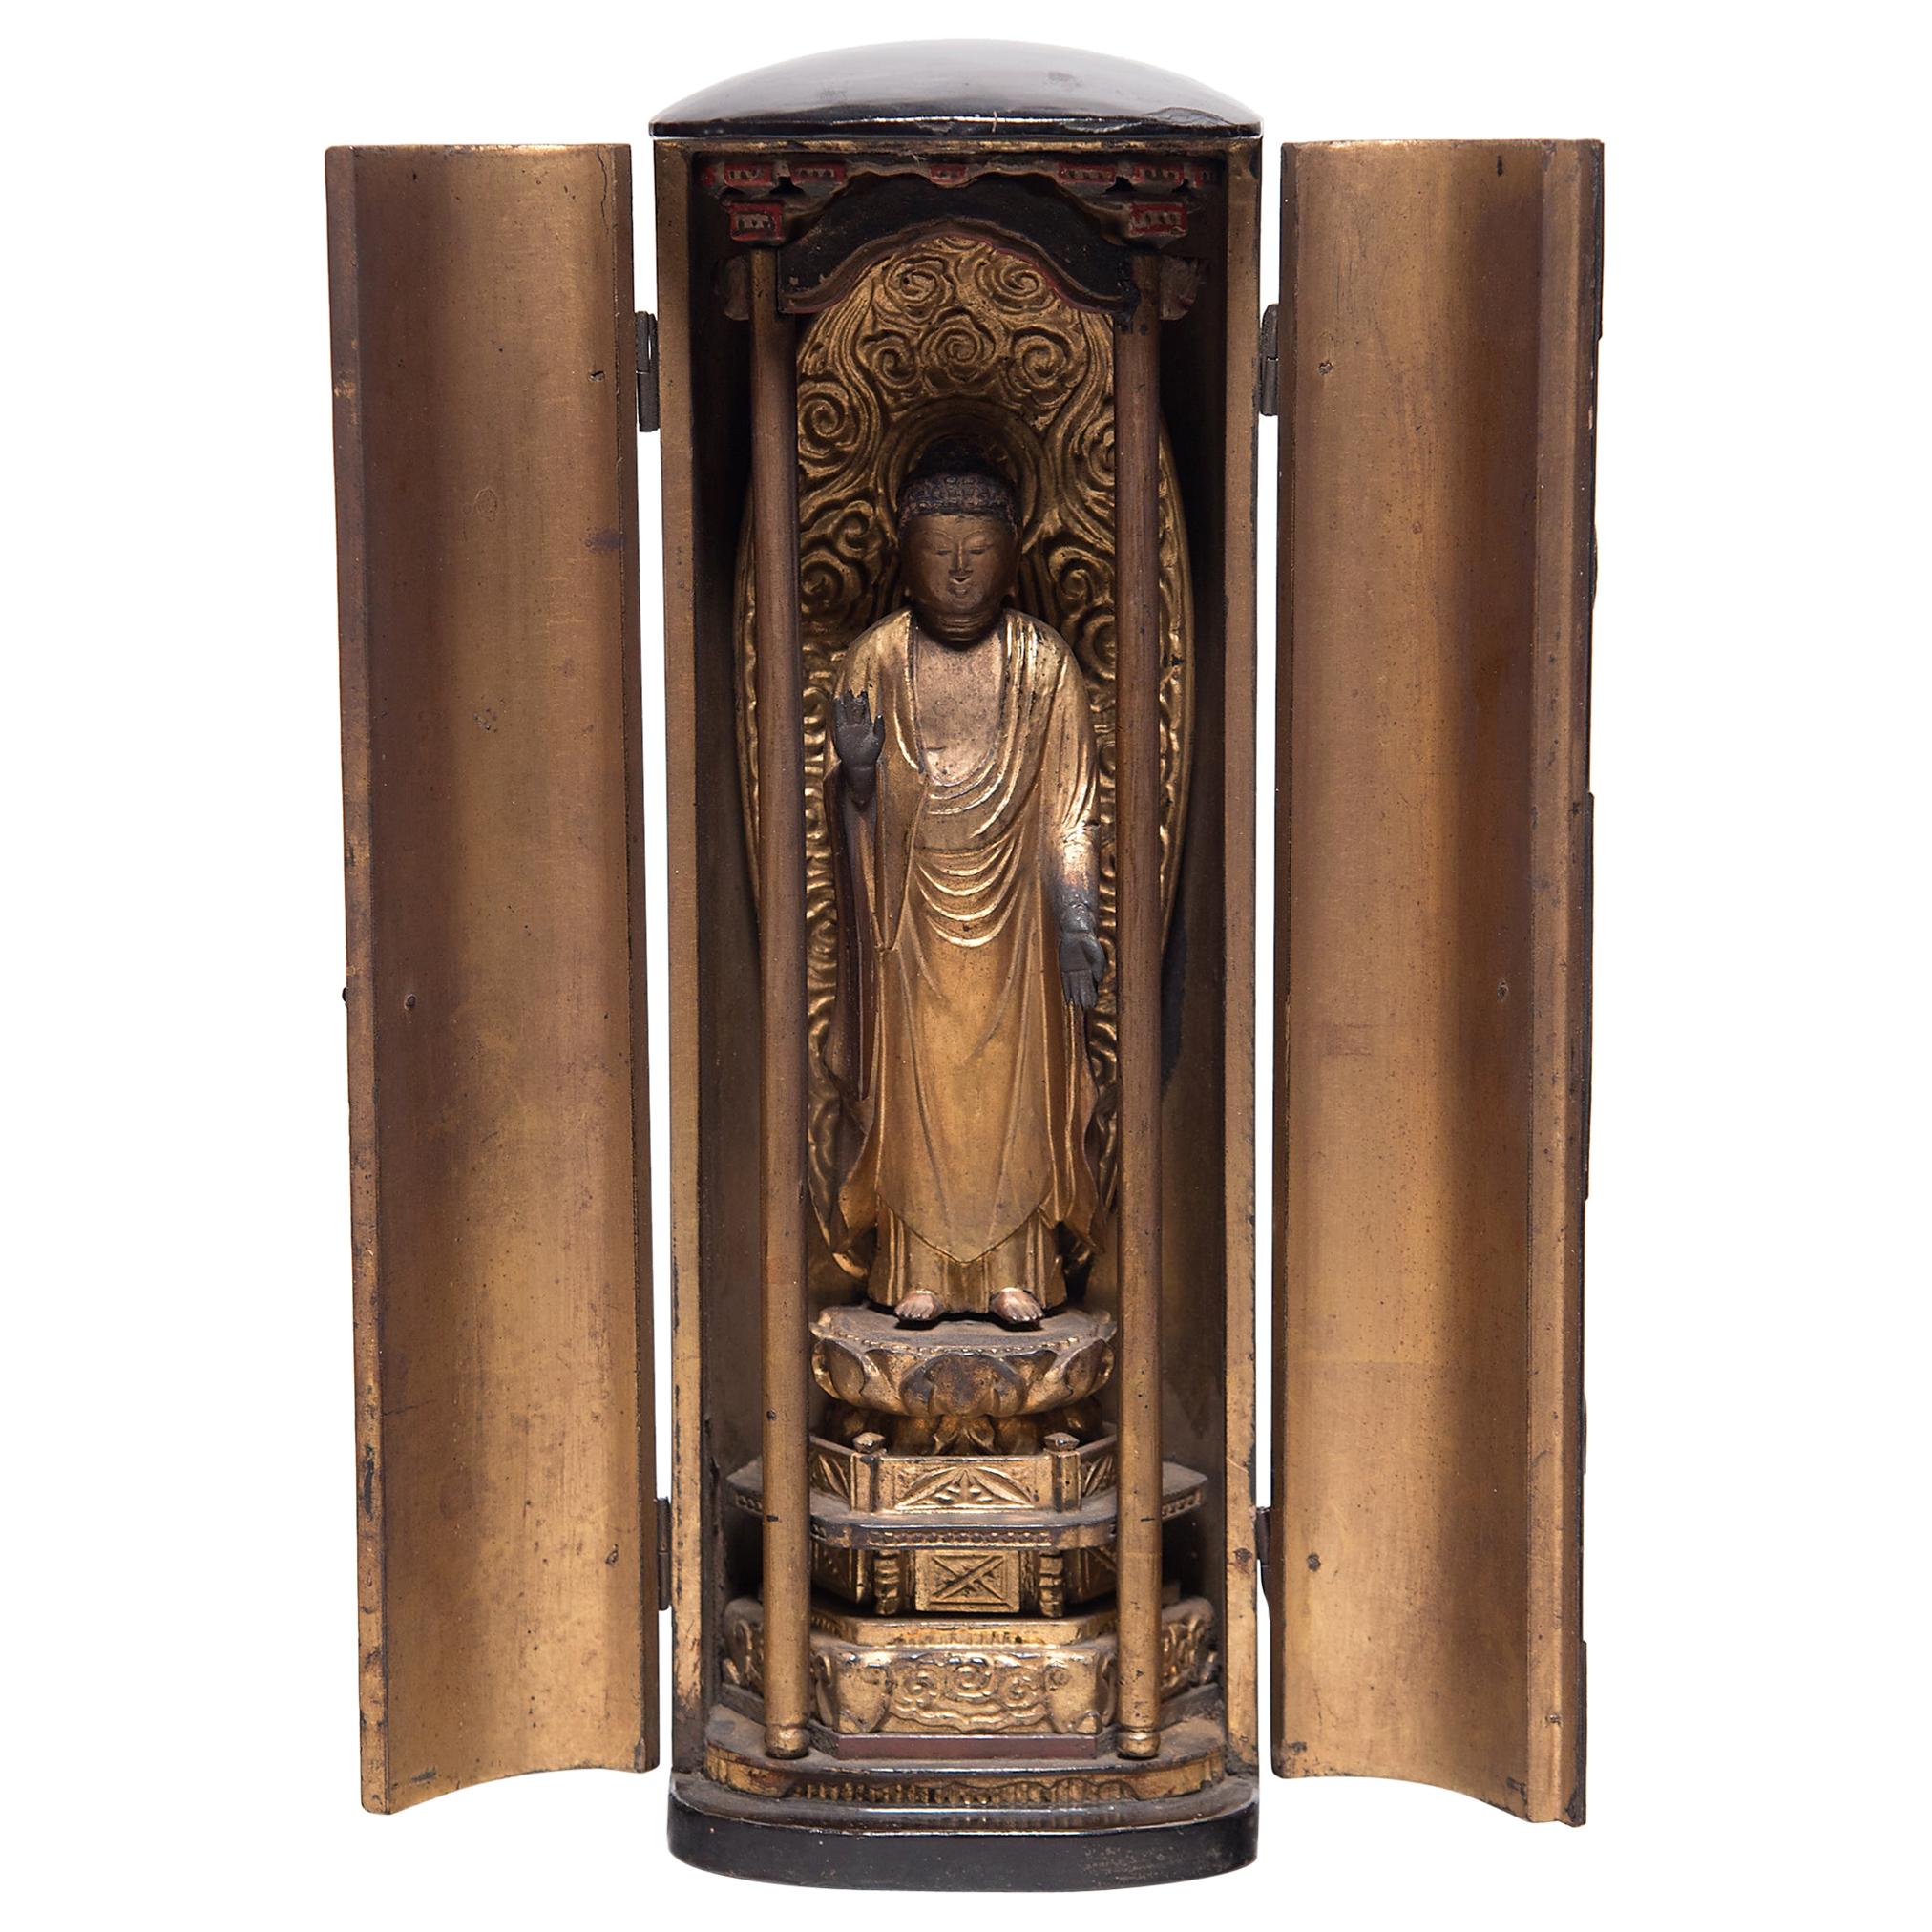 The simple exterior of even black lacquer that encases this 19th century Japanese traveling shrine belies the splendor within. The hinged doors open to a gilt interior framing an intricately carved figure of the historical Buddha, known in Japanese